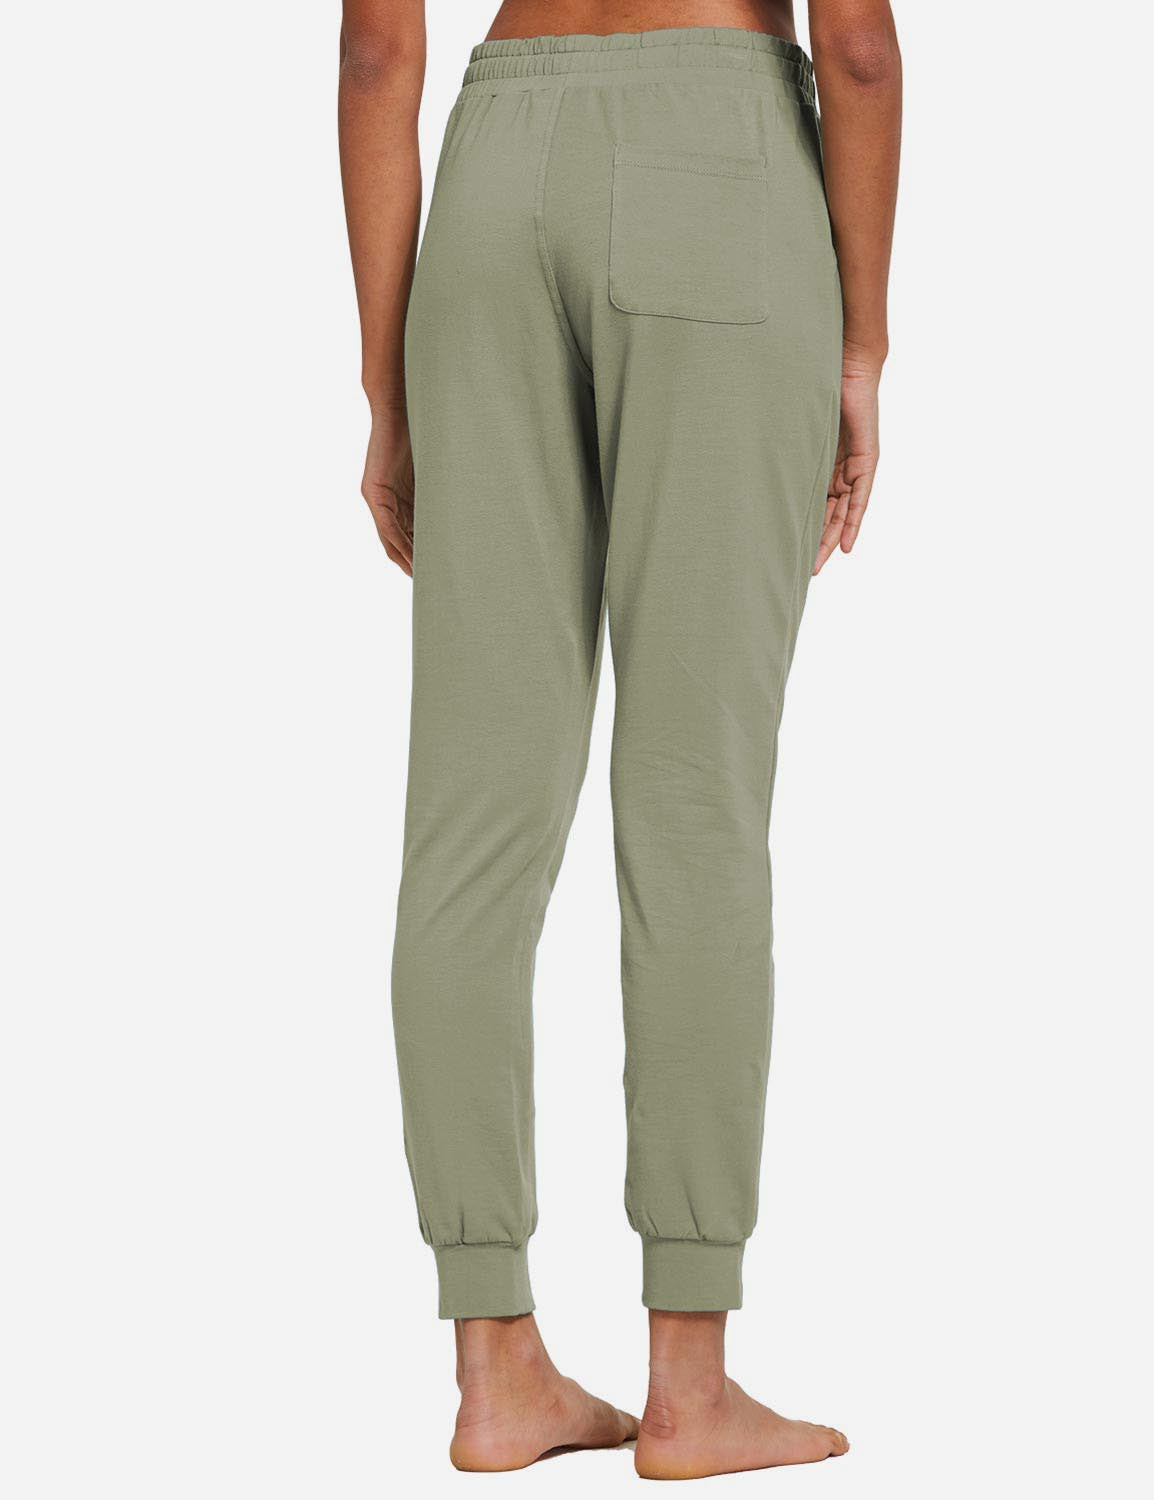 Baleaf Women's Cotton Comfy Pocketed & Tapered Weekend Joggers abh103 Spray Green Back